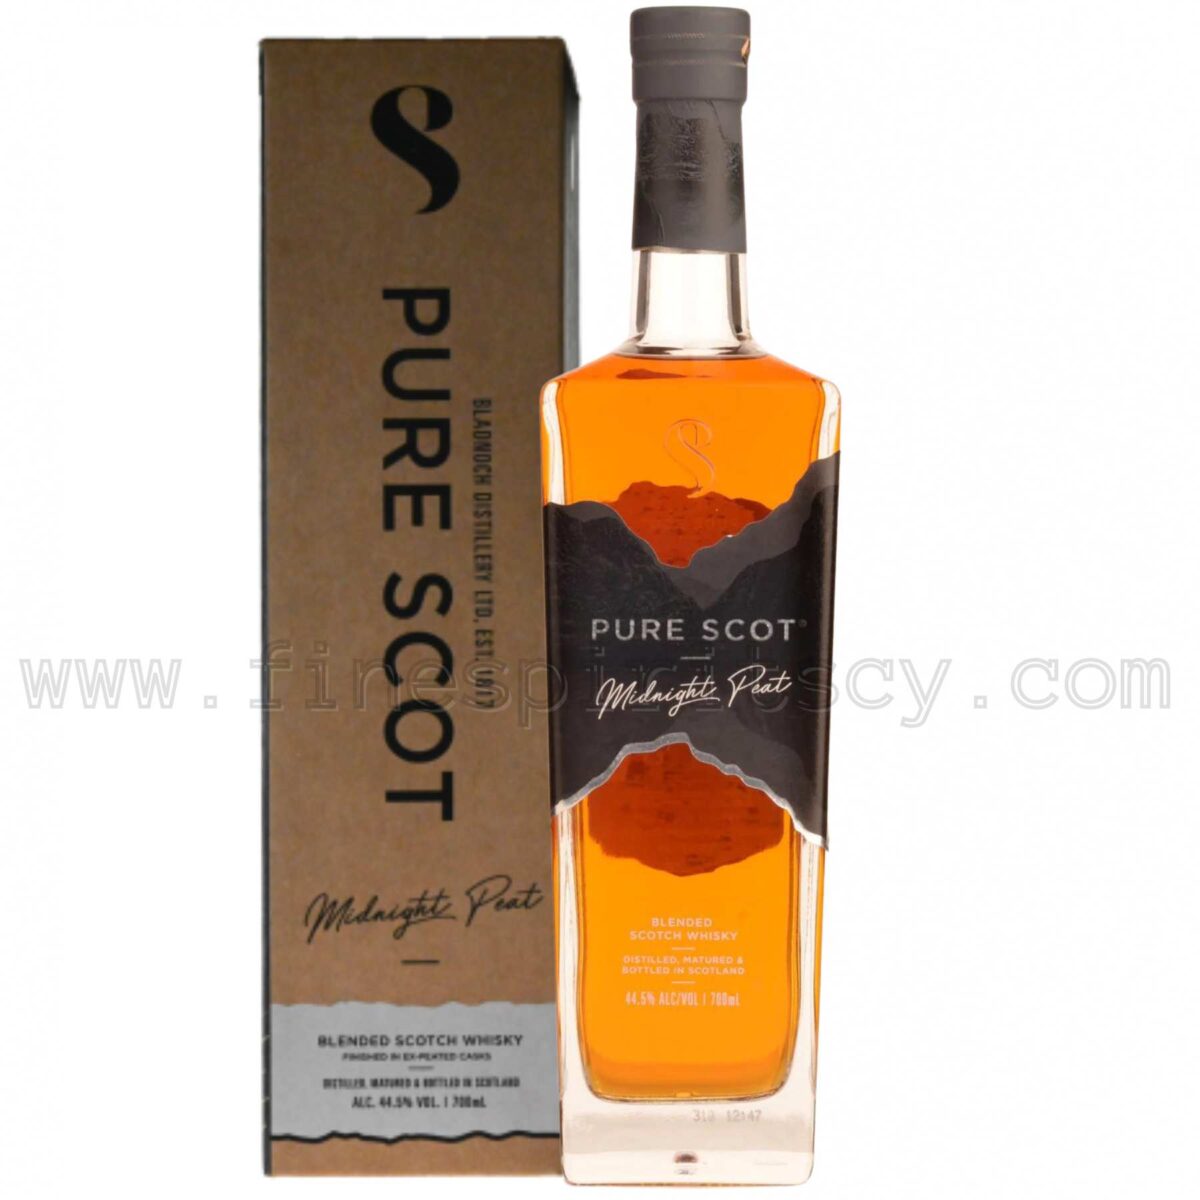 Bladnoch Pure Scot Peat Midnight Cyprus Whisky Scotch Lowlands Price 70cl